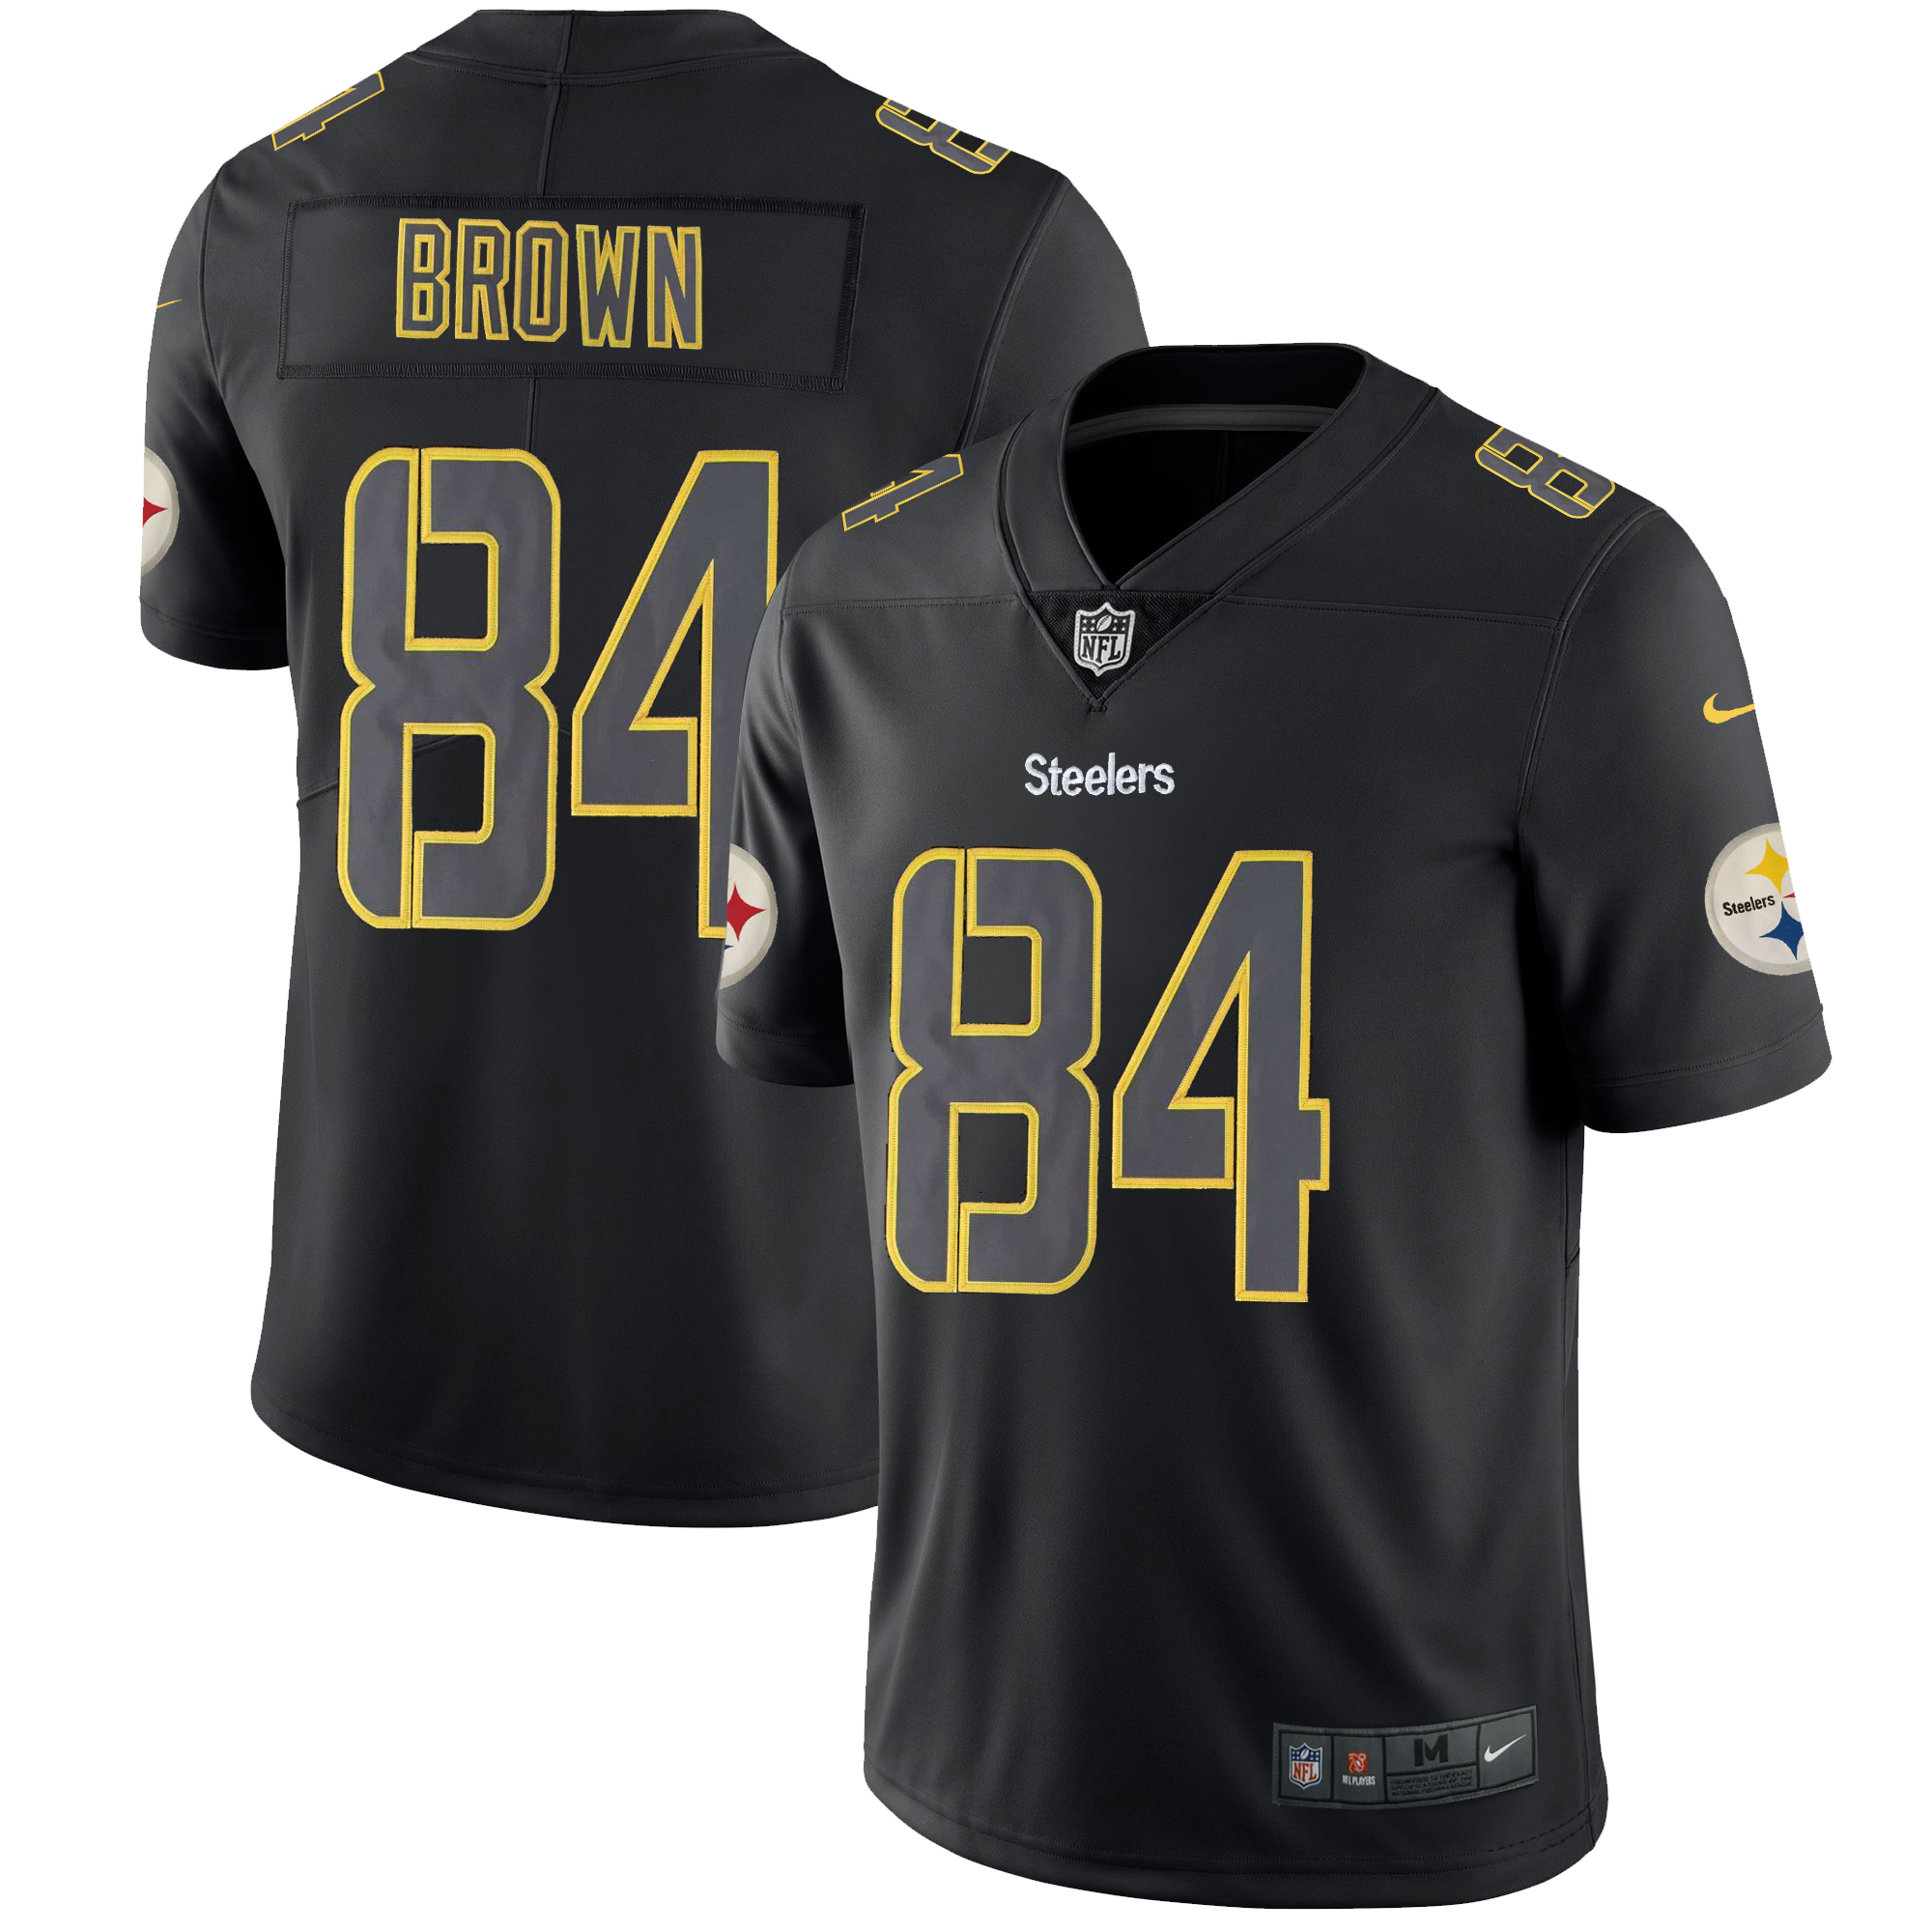 Men's Pittsburgh Steelers #84 Antonio Brown Black 2018 Impact Limited Stitched NFL Jersey